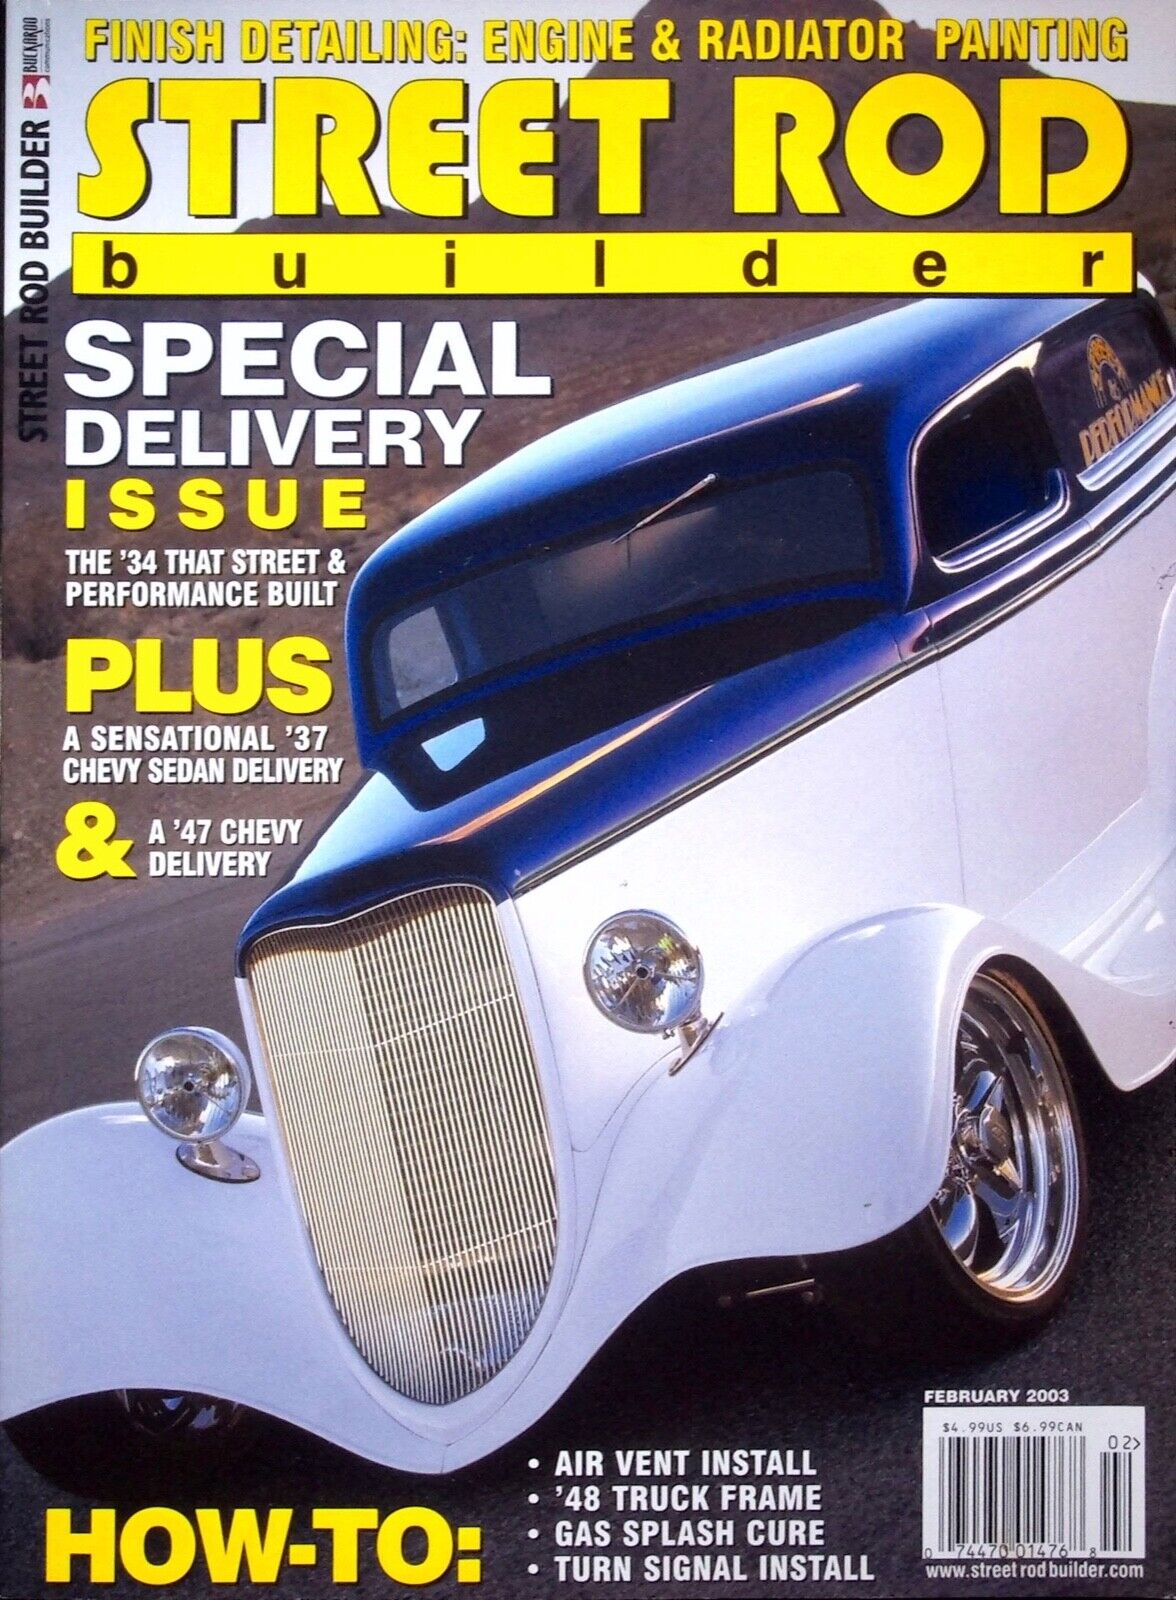 SPECIAL DELIVERY ISSUE - STREER ROD BUILDER MAGAZINE, FEBRUARY 2003